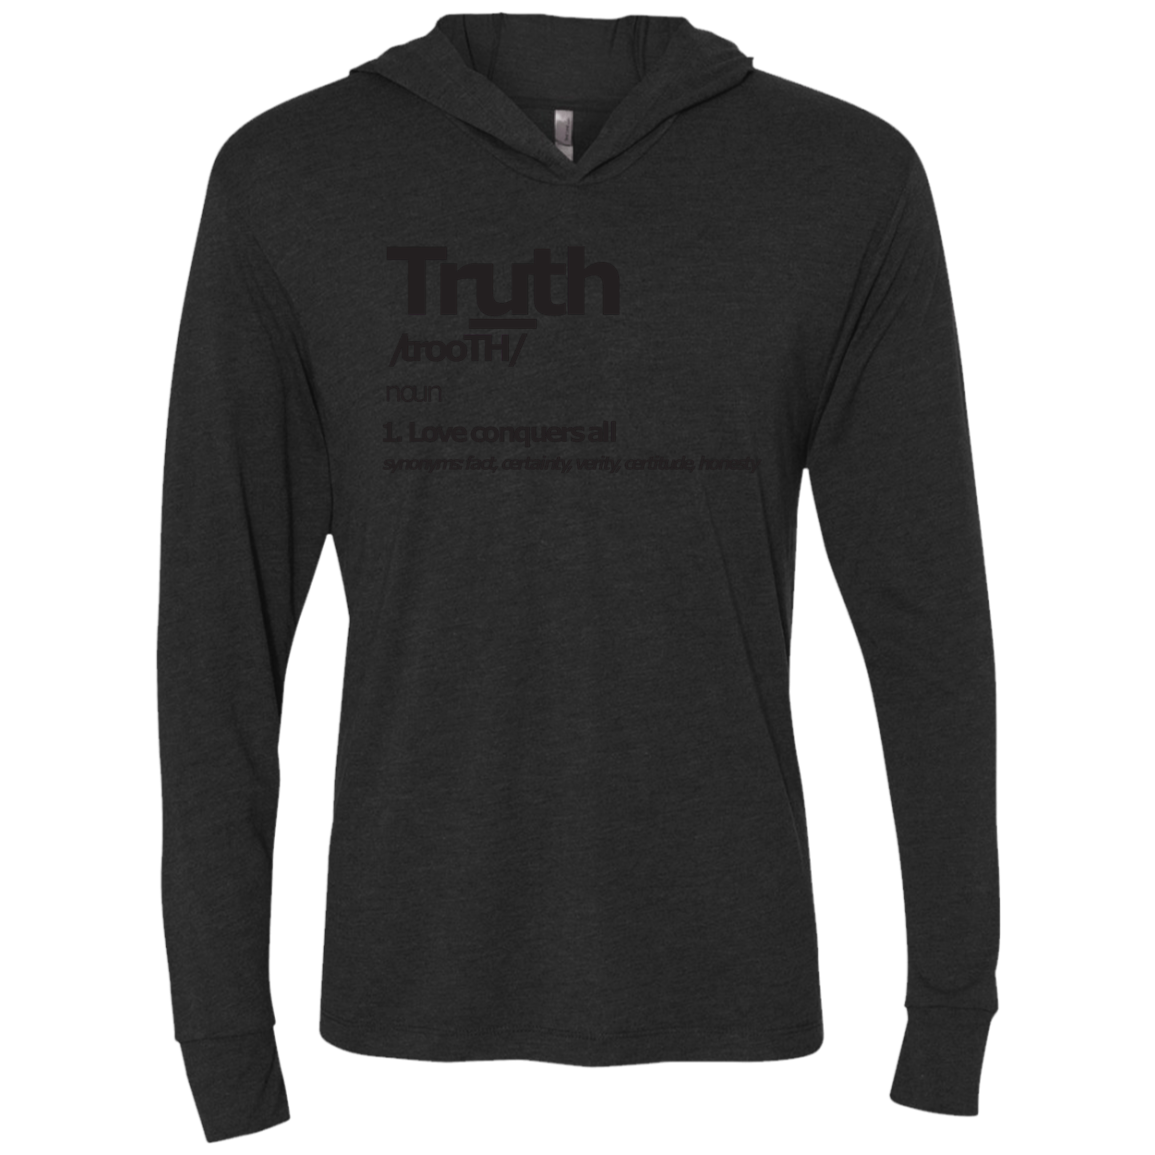 Kings Truth Super Soft Triblend LS Hooded T-Shirt